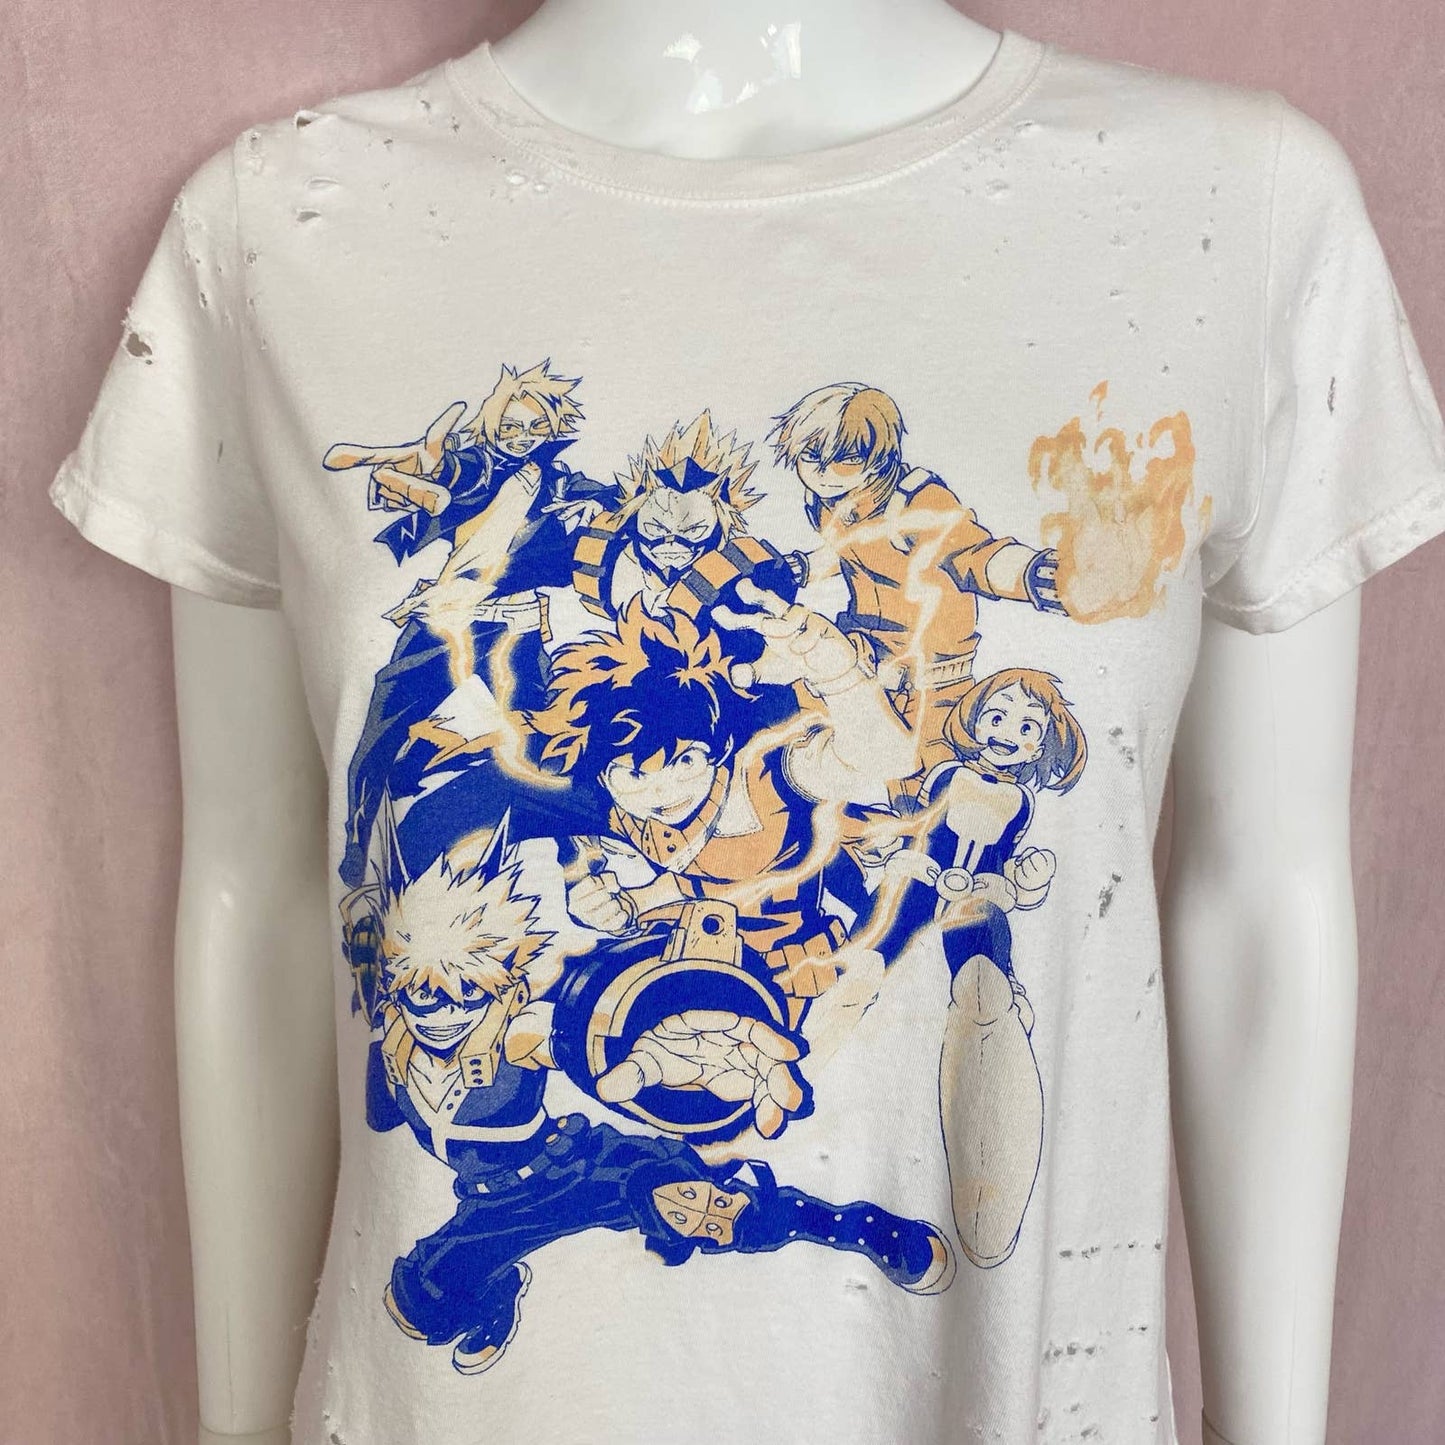 Reworked My Hero Academia Distressed Graphic Tee, Size Large